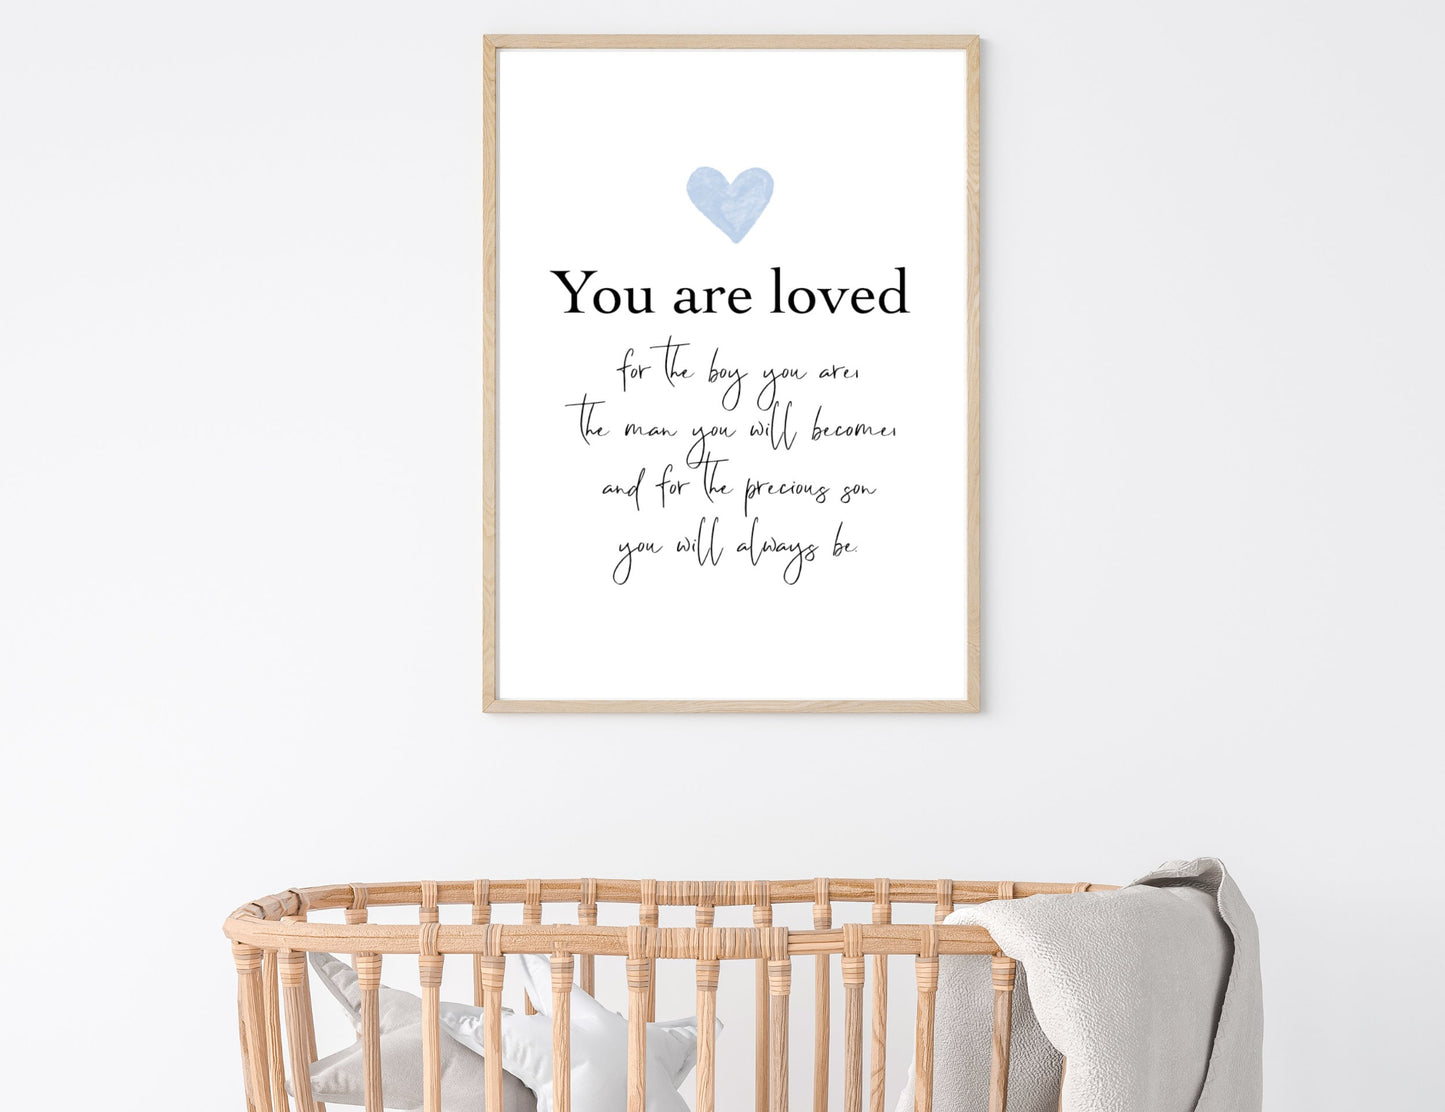 A digital print is hung above a baby’s cradle. The digital print has a baby blue heart at the top and a piece of writing that says: “You are loved for the boy you are, the man you will become, and for the precious son you will always be.”